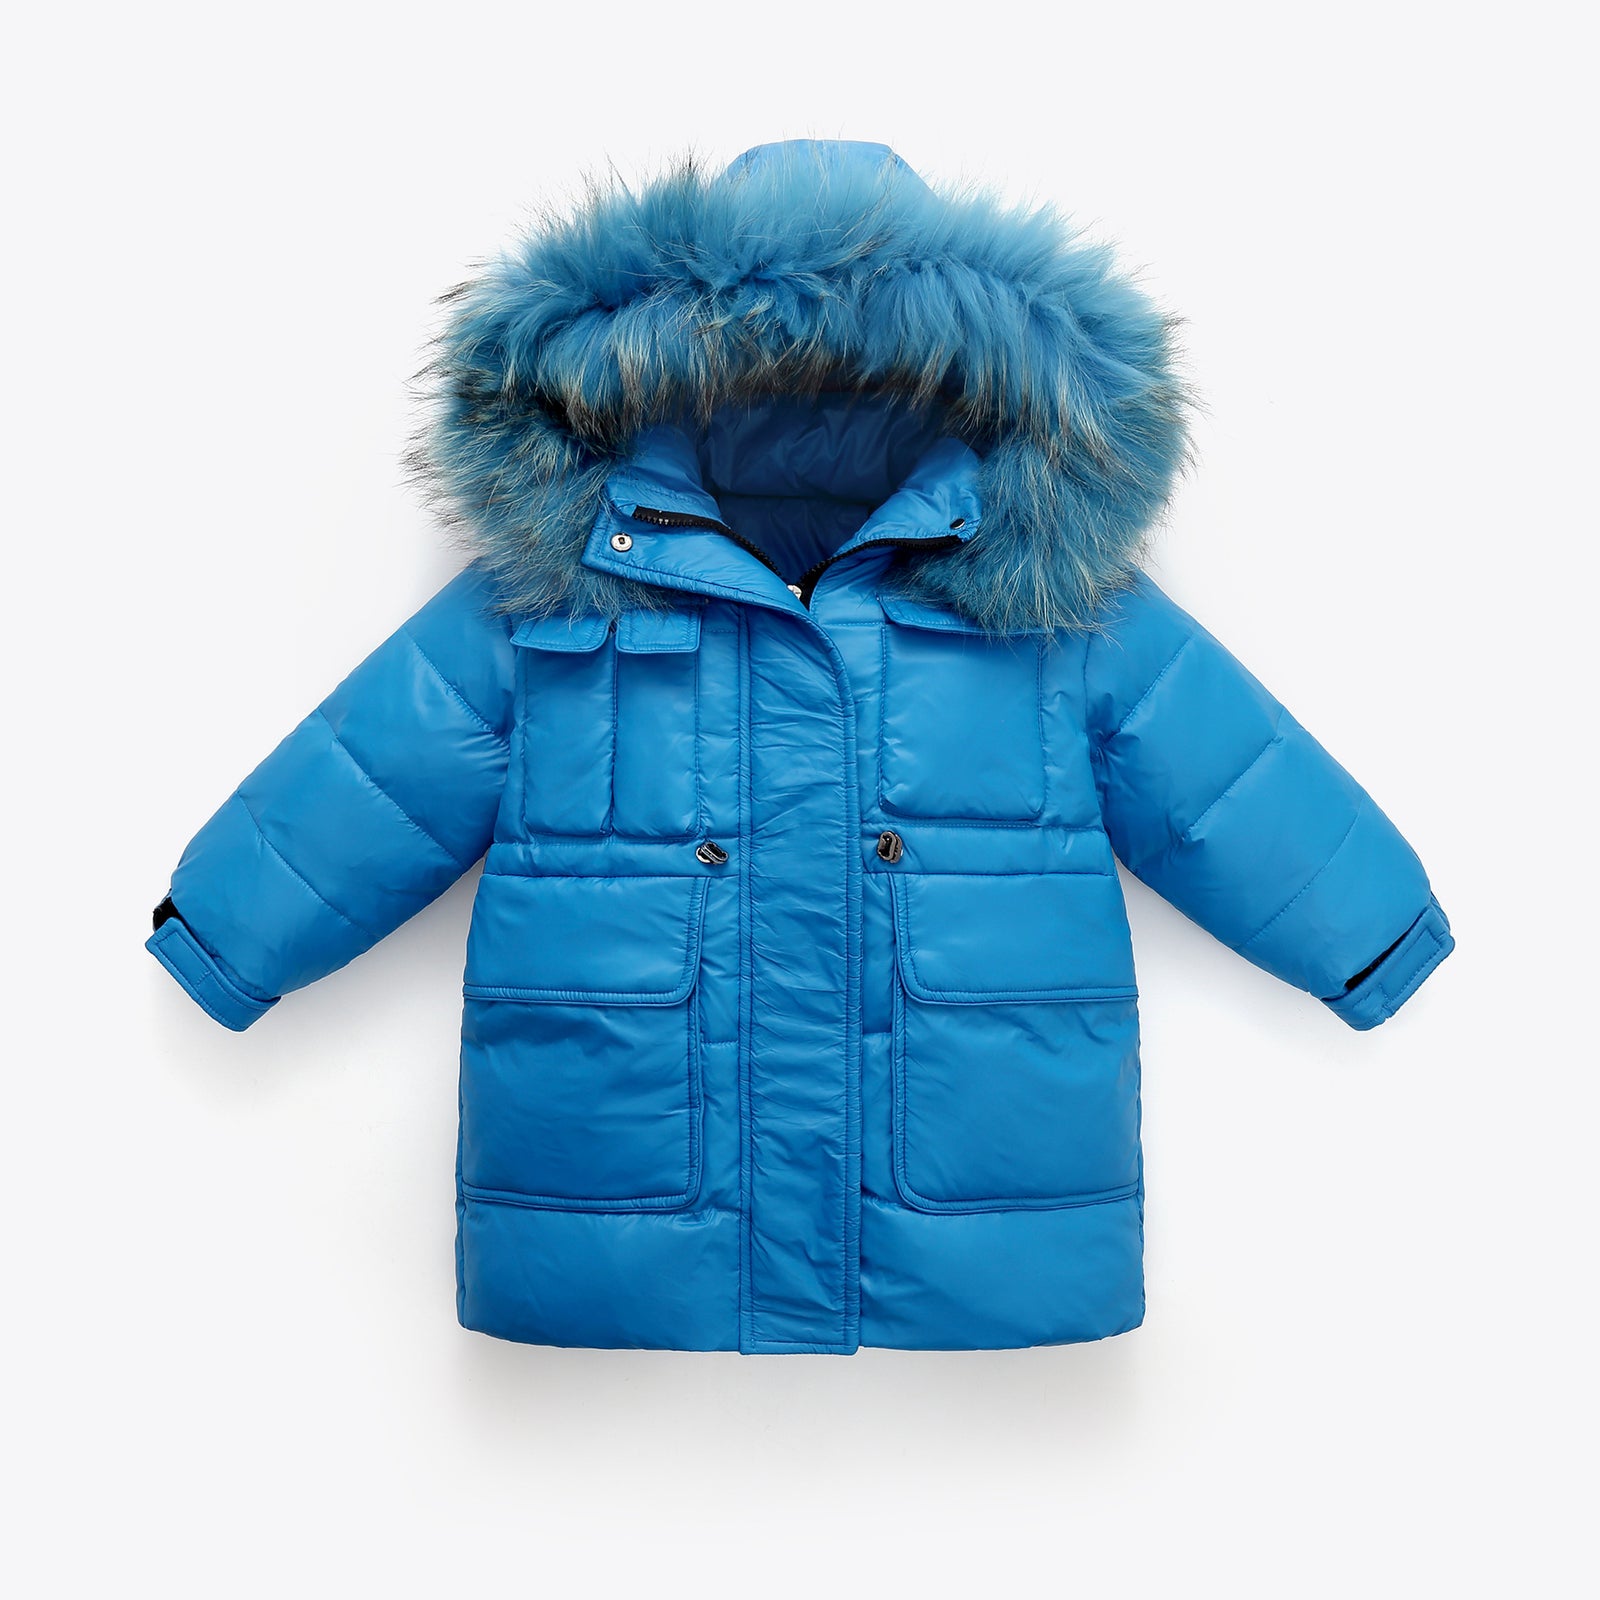 European And American Explosive Styles Girls' Down Jackets - TryKid